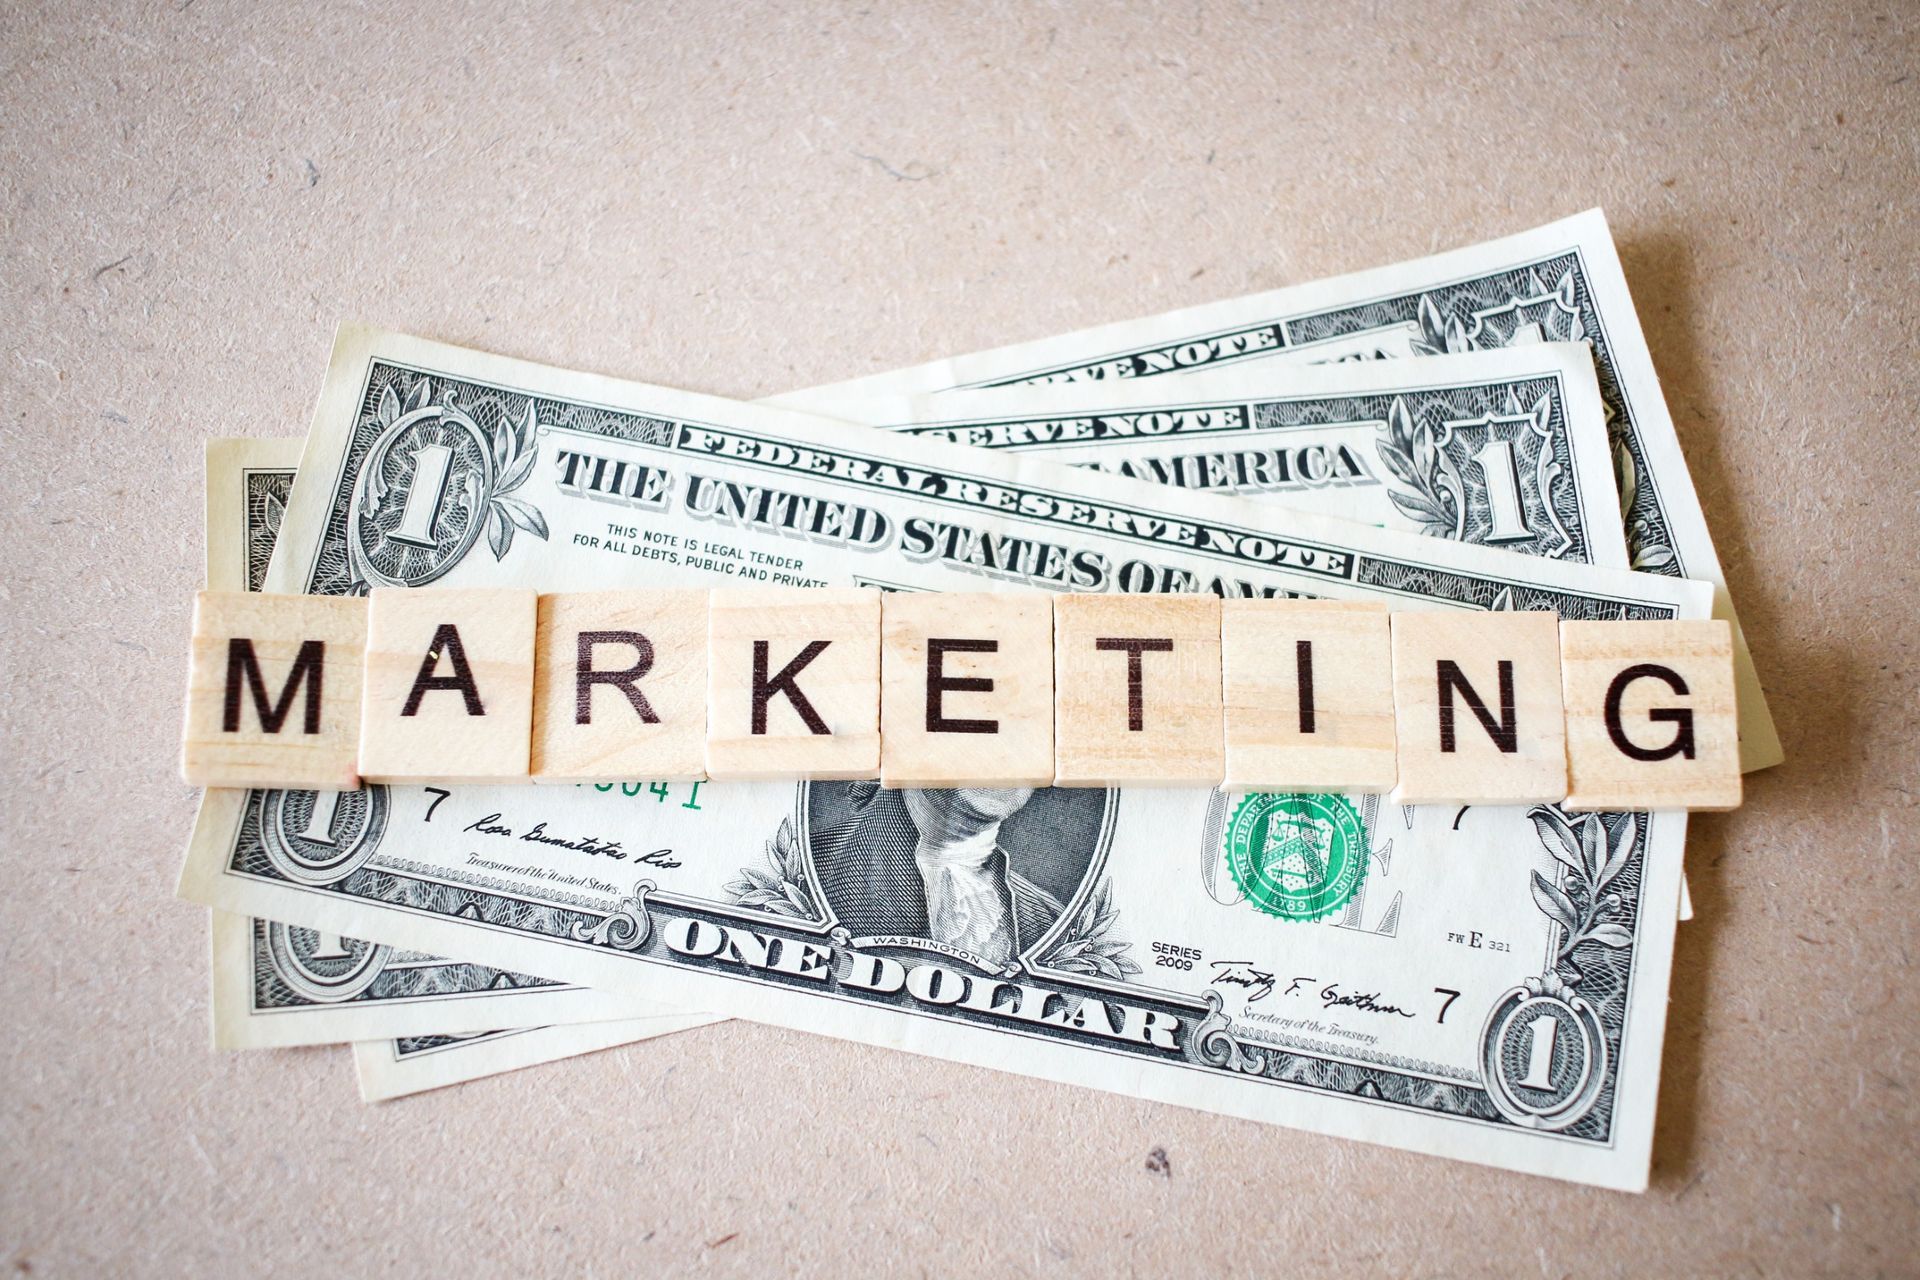 Marketing is Investment